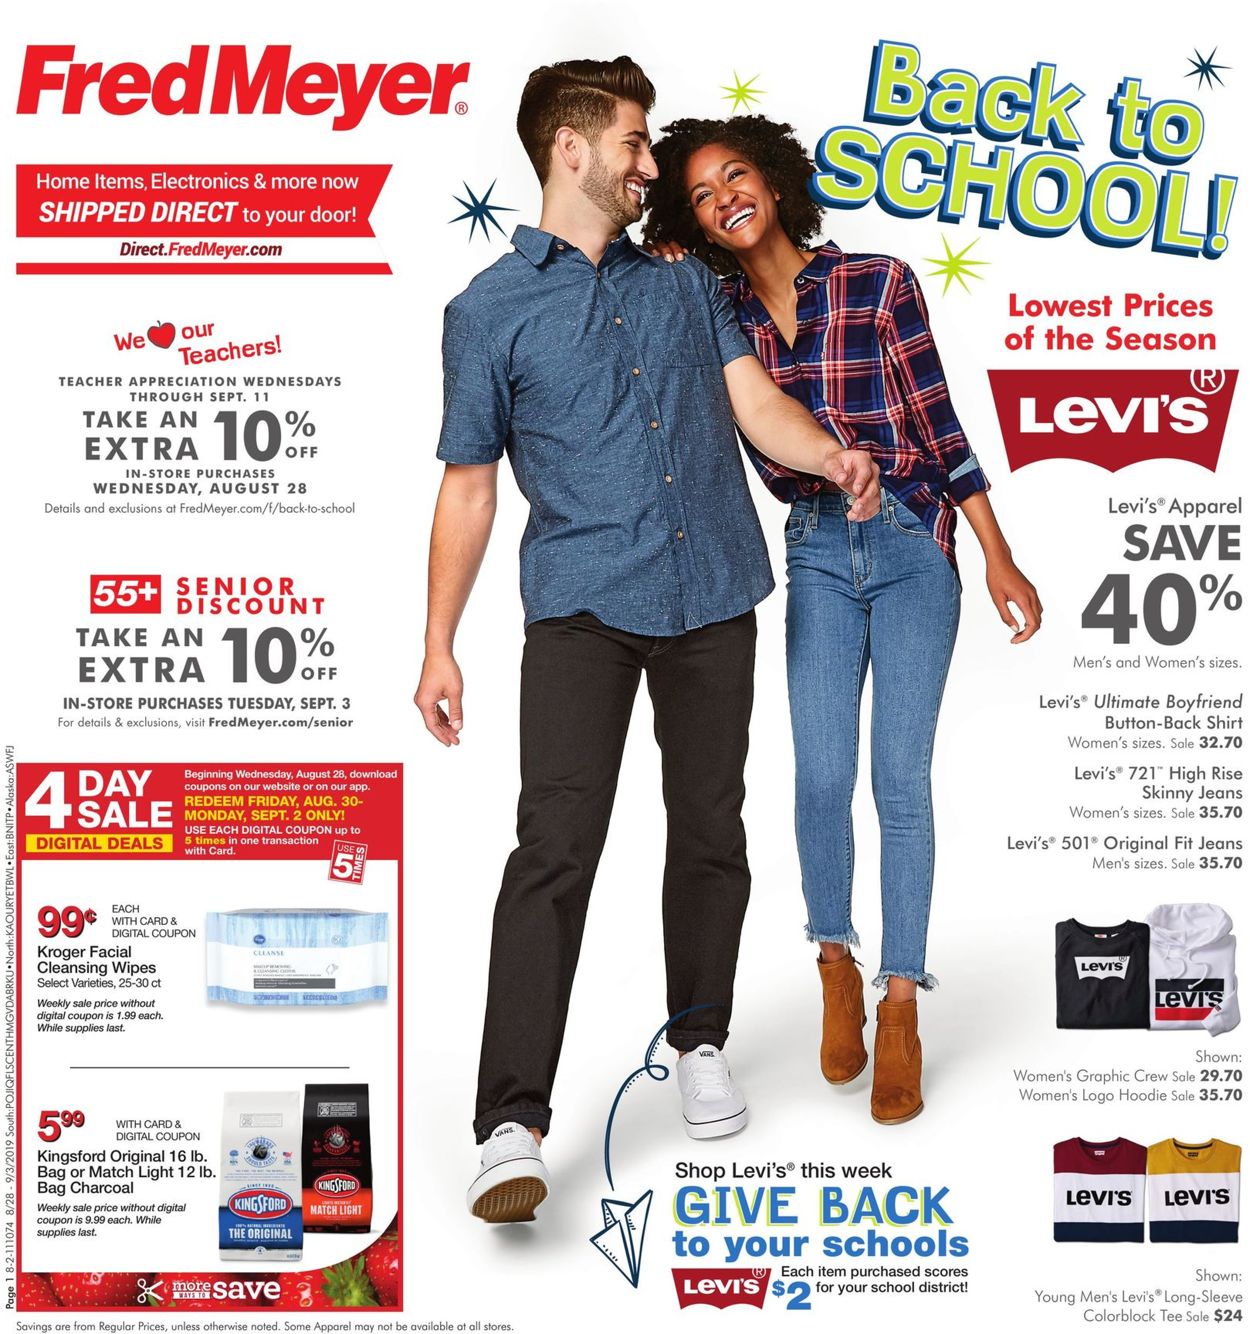 levis at fred meyer